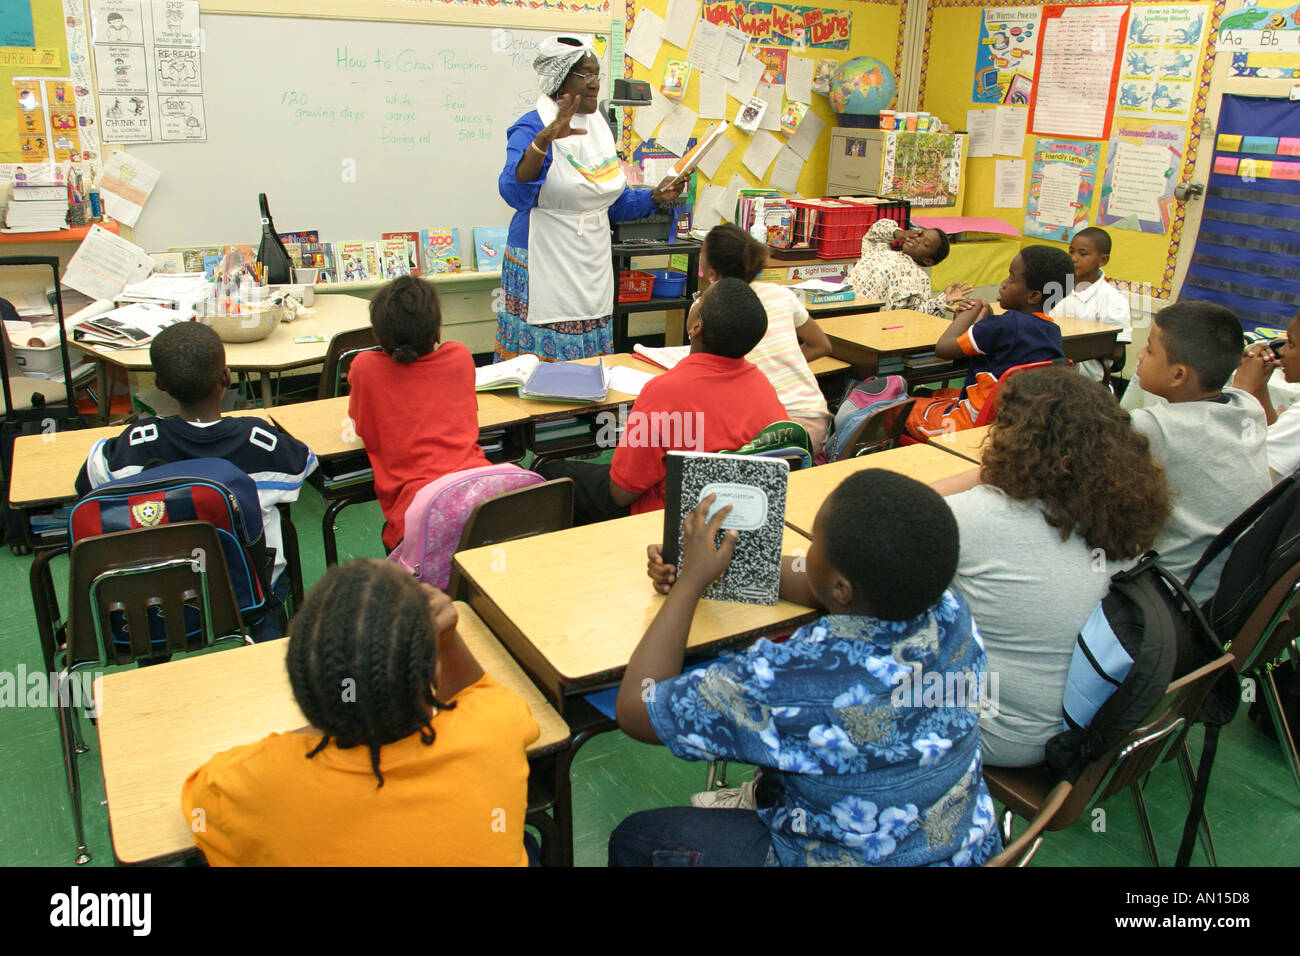 Miami Florida,Overtown,Frederick Douglass Elementary,teachers,dress,outfit,literary costume,reading,education,fictional character,reading,student stud Stock Photo